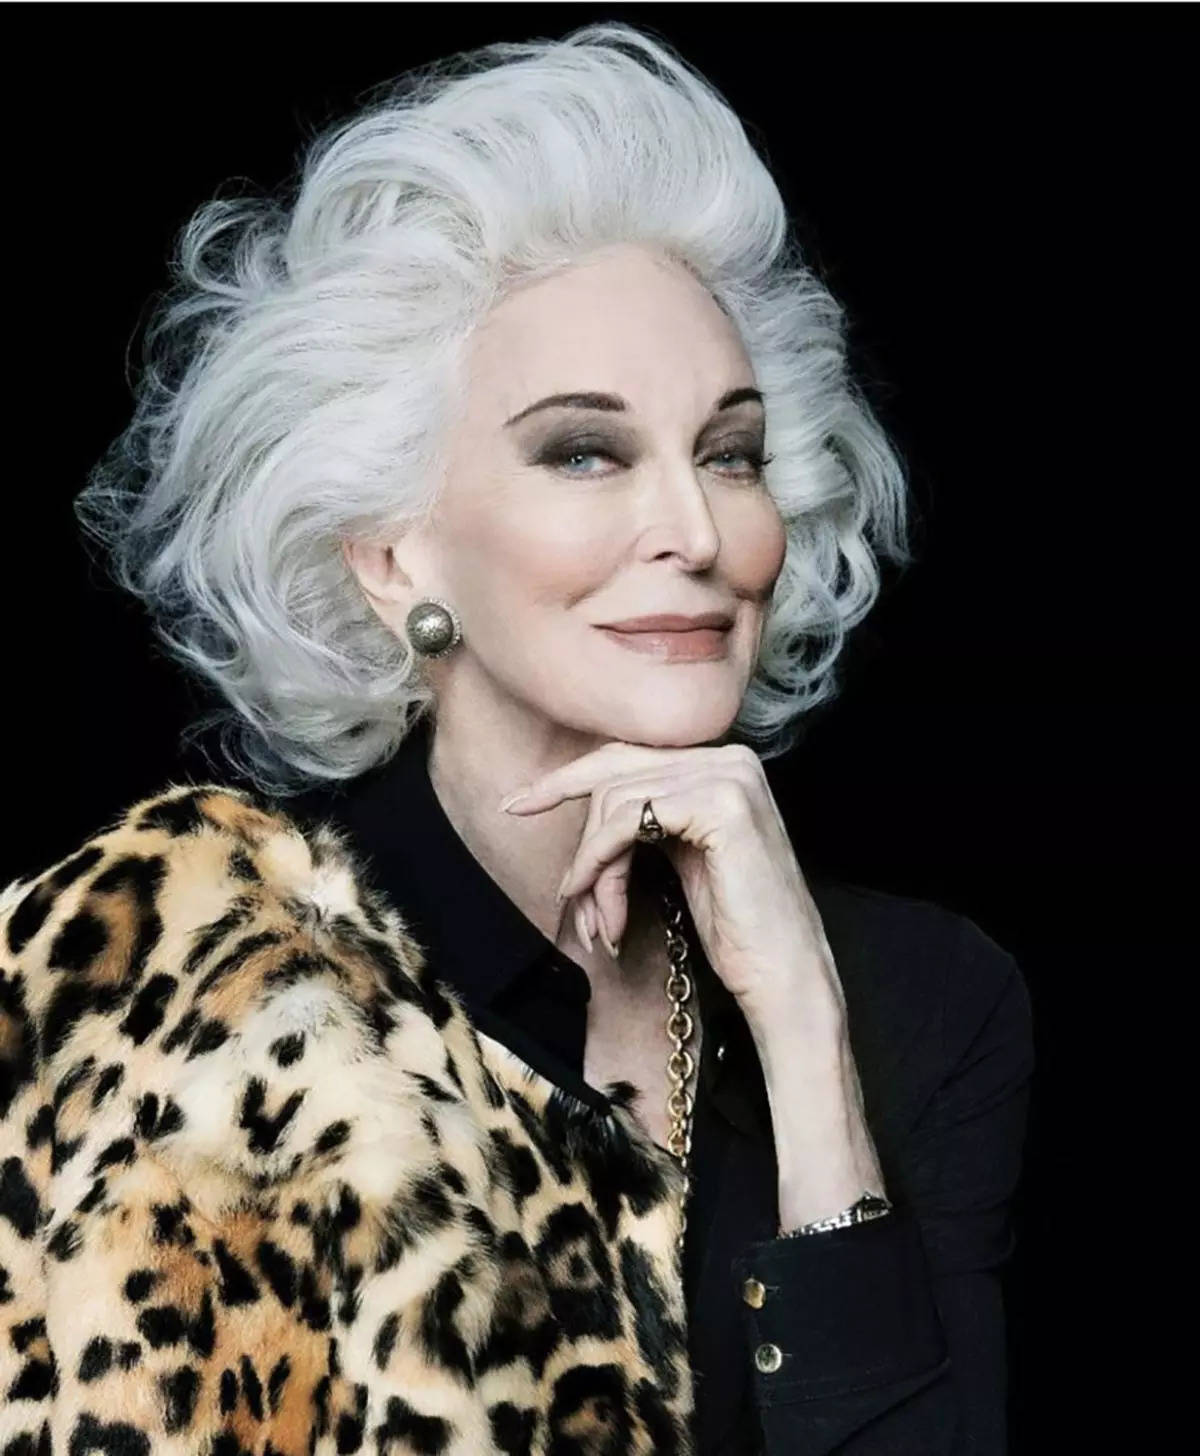 91-year-old Carmen Dell'Orefice, the world's oldest supermodel, stuns in a  bold shoot